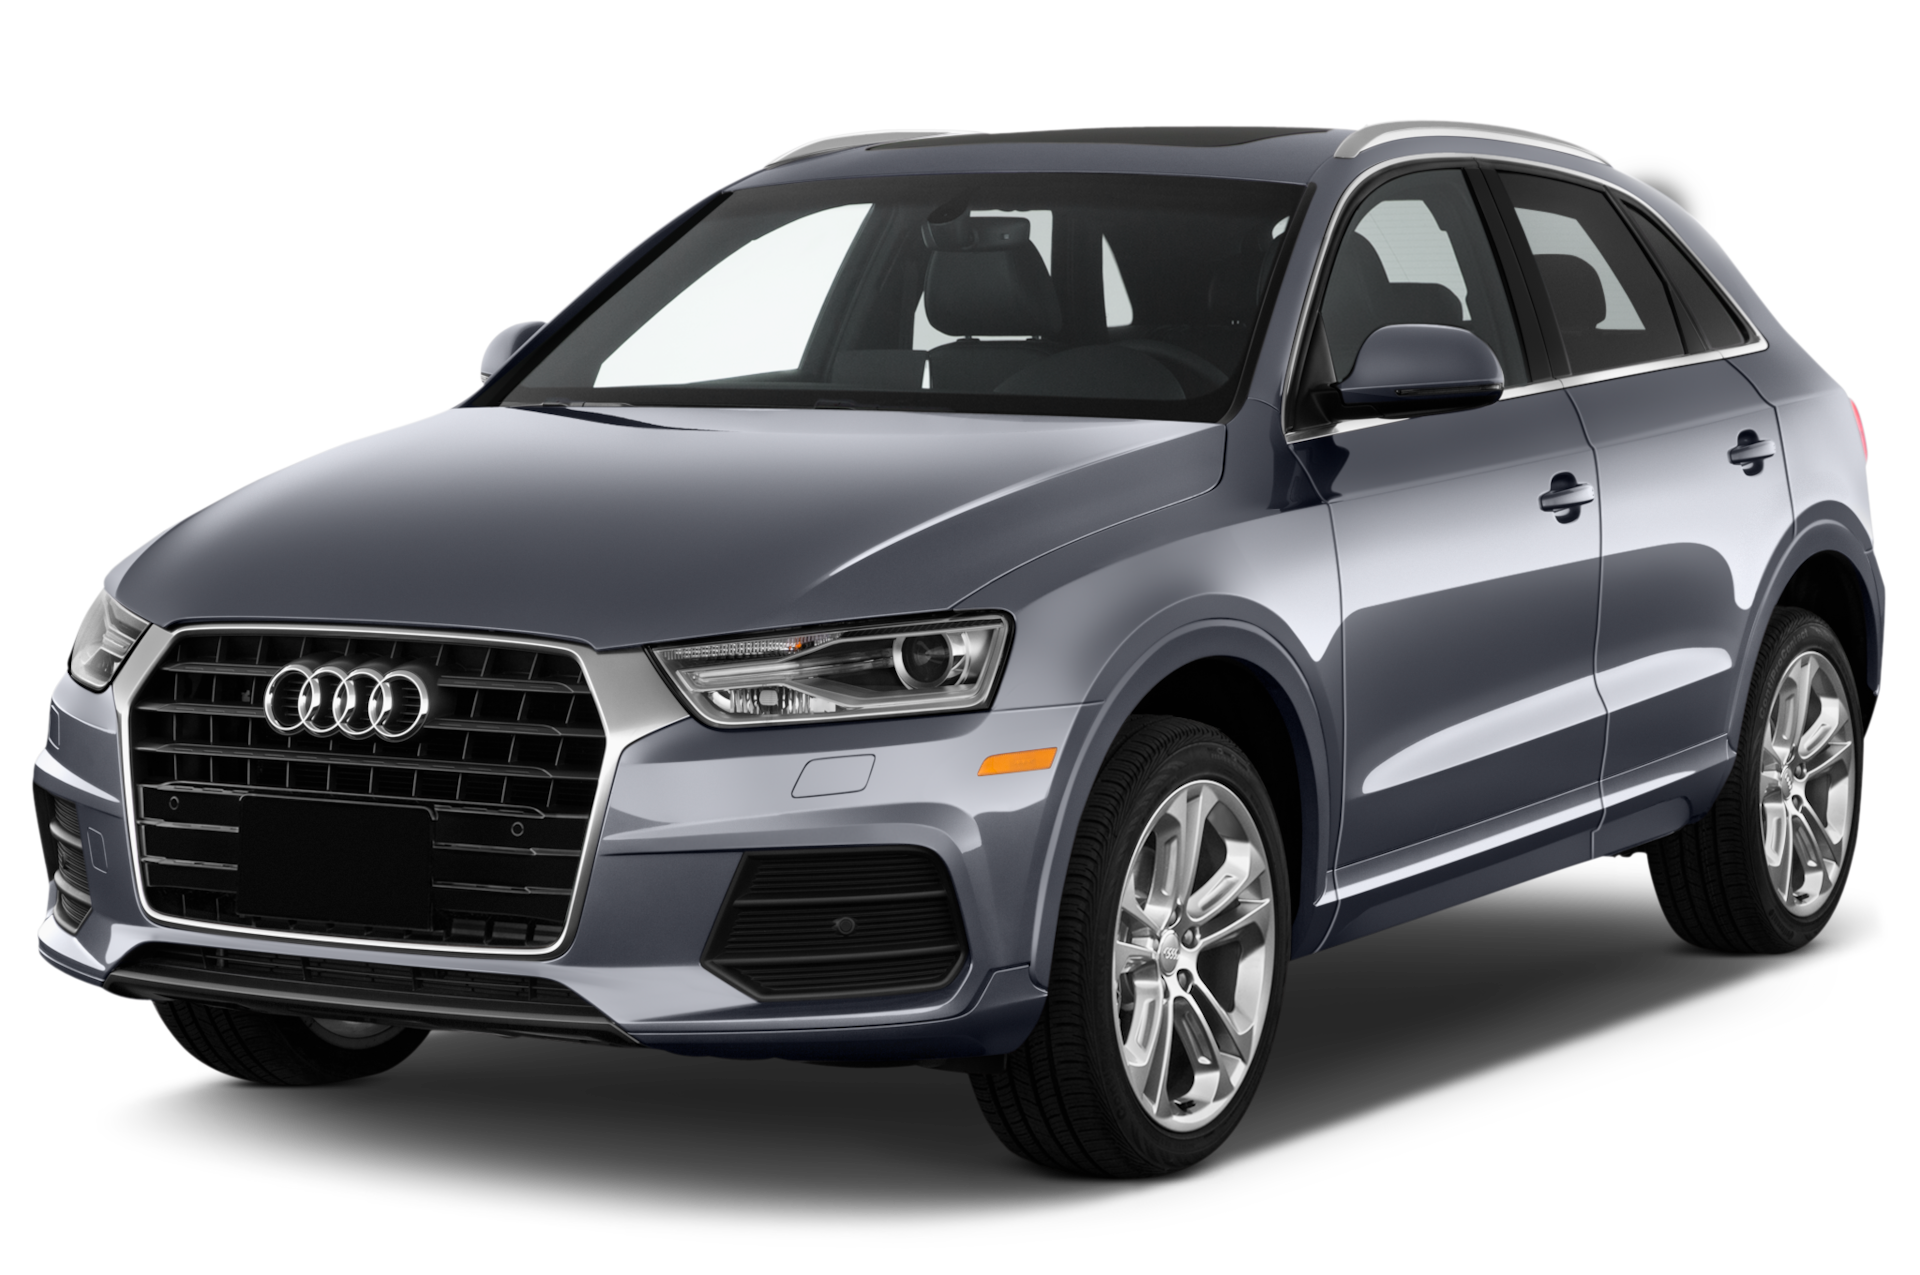 2016 Audi Q3 Prices, Reviews, and Photos - MotorTrend